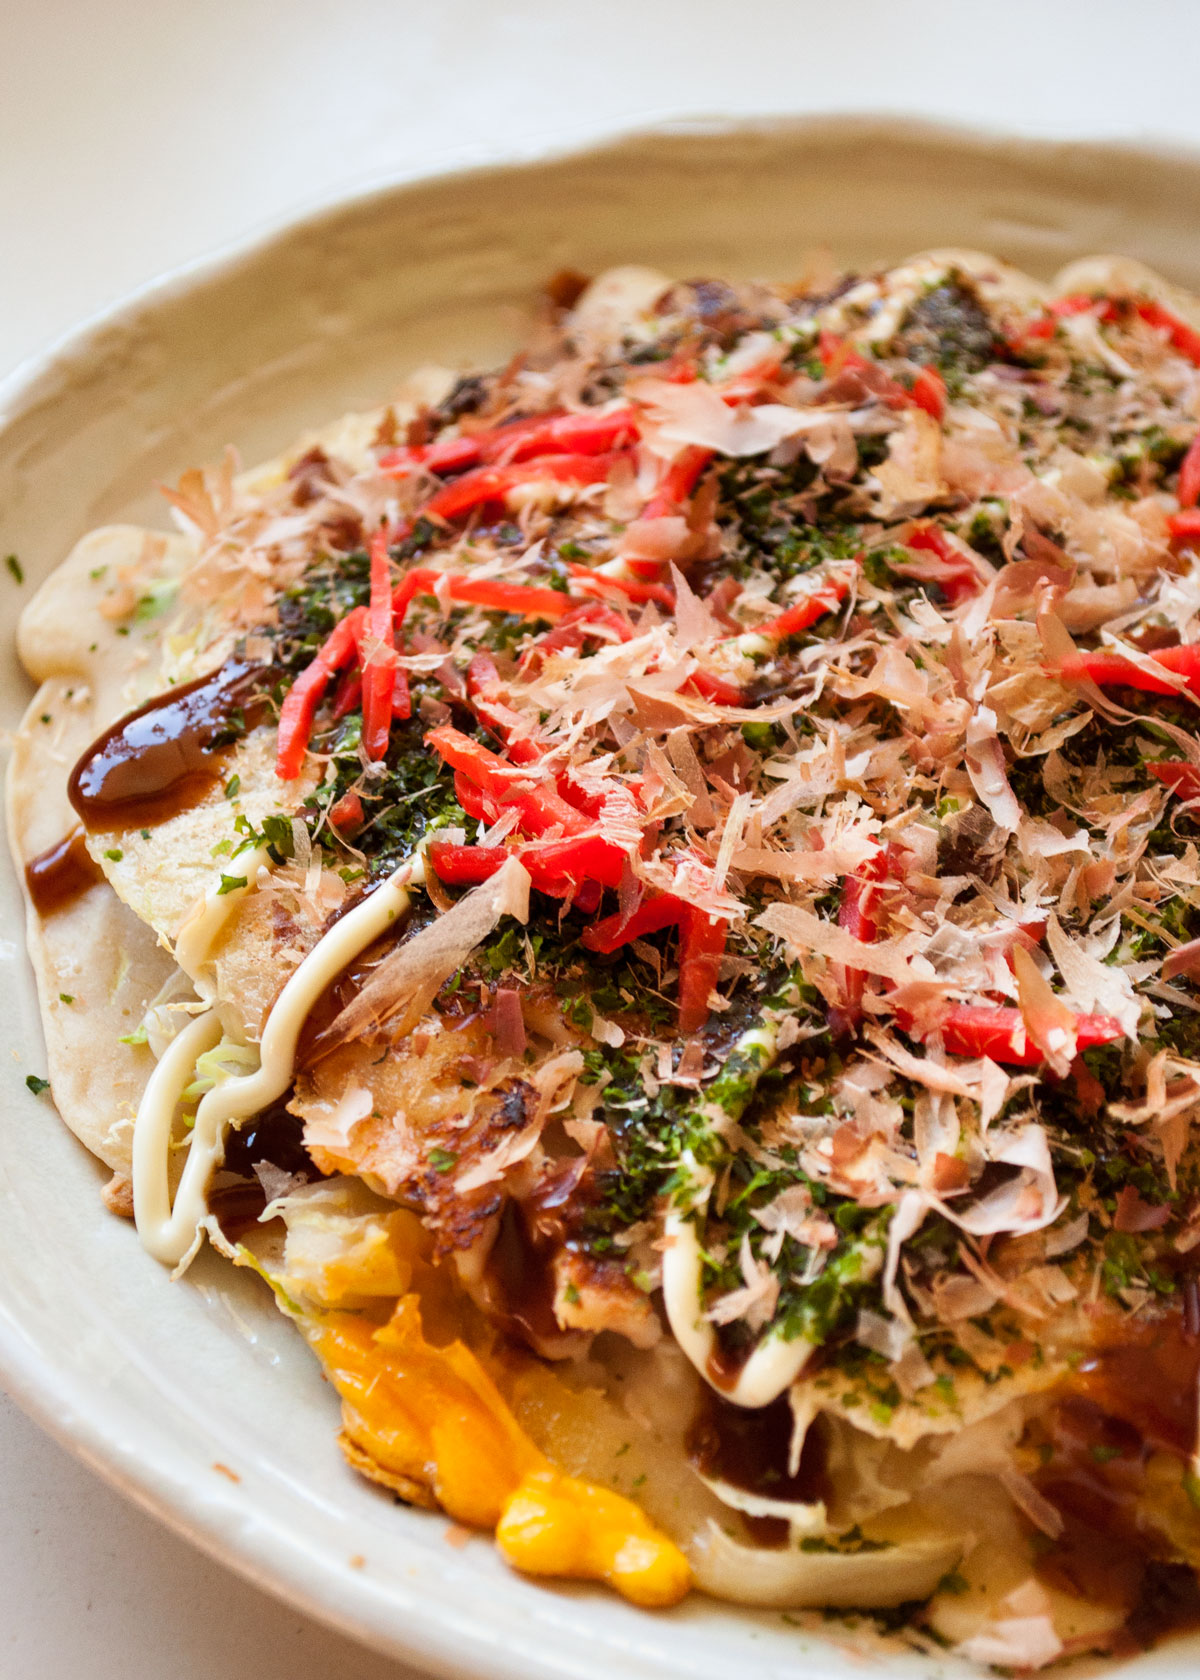 Okonomiyaki is the famous Japanese savory pancake that is usually cooked at the dining table so you can customize it to your taste.